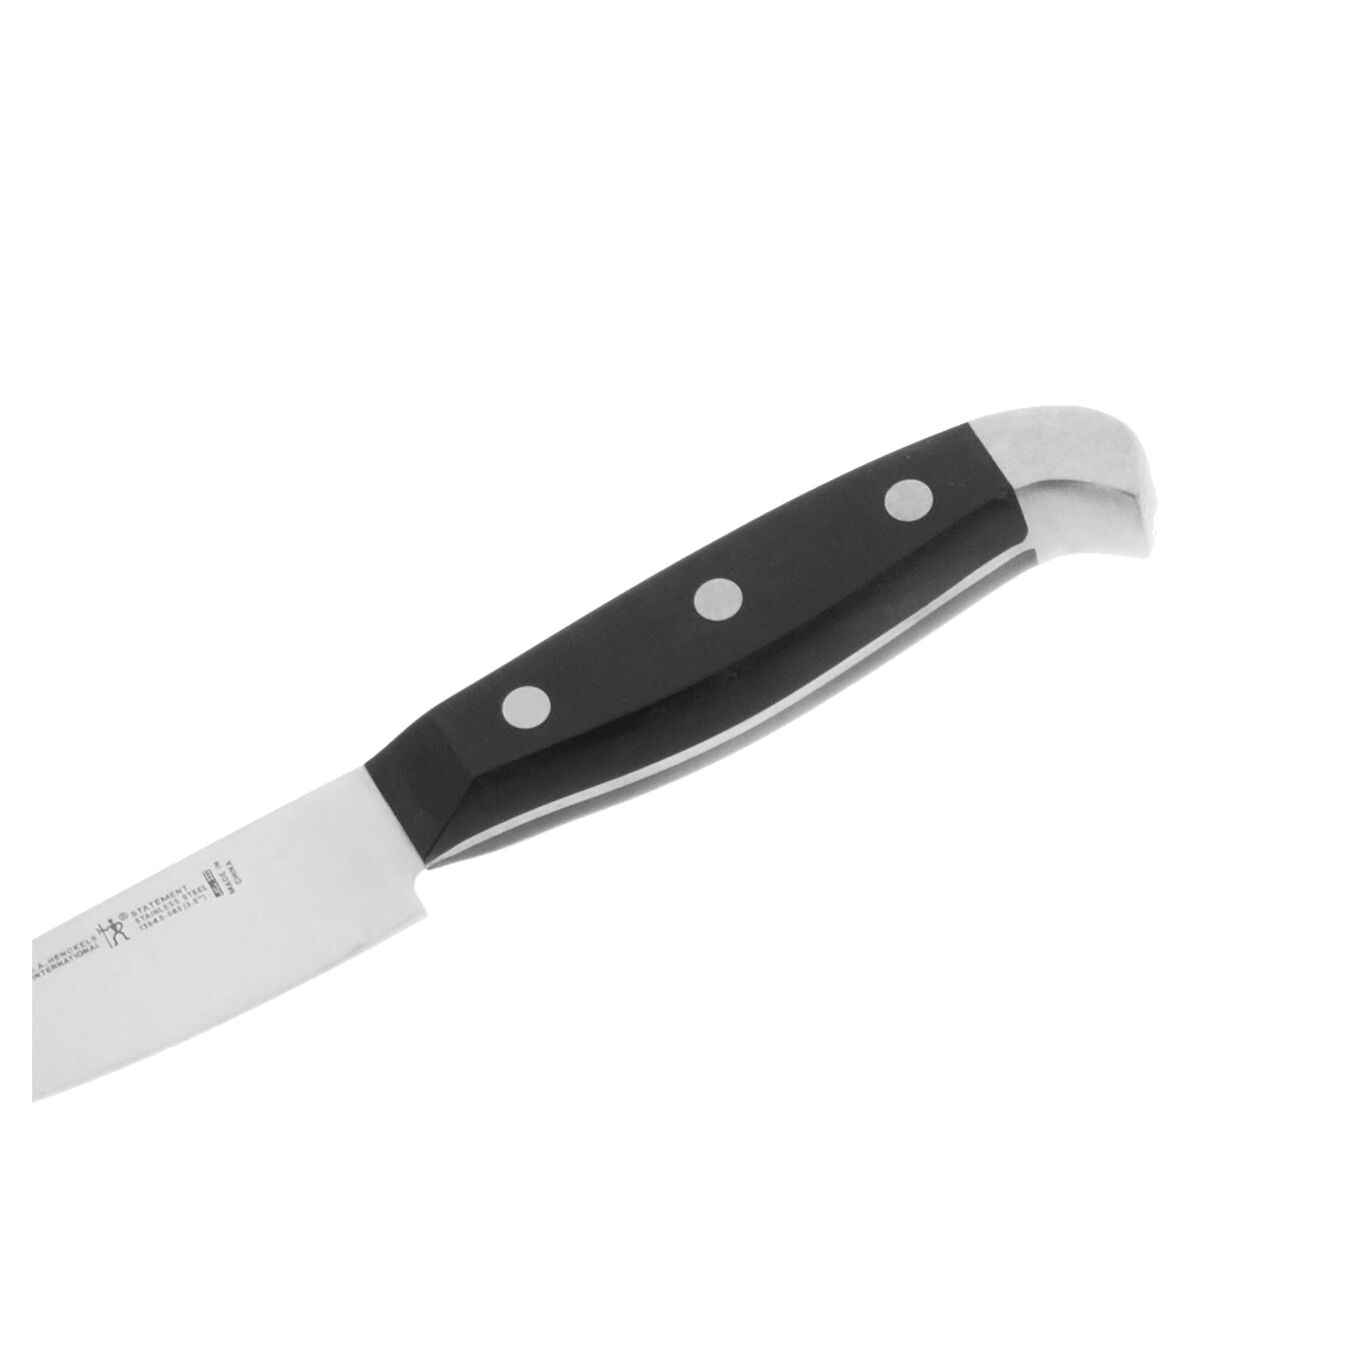 3-inch, Paring knife,,large 3